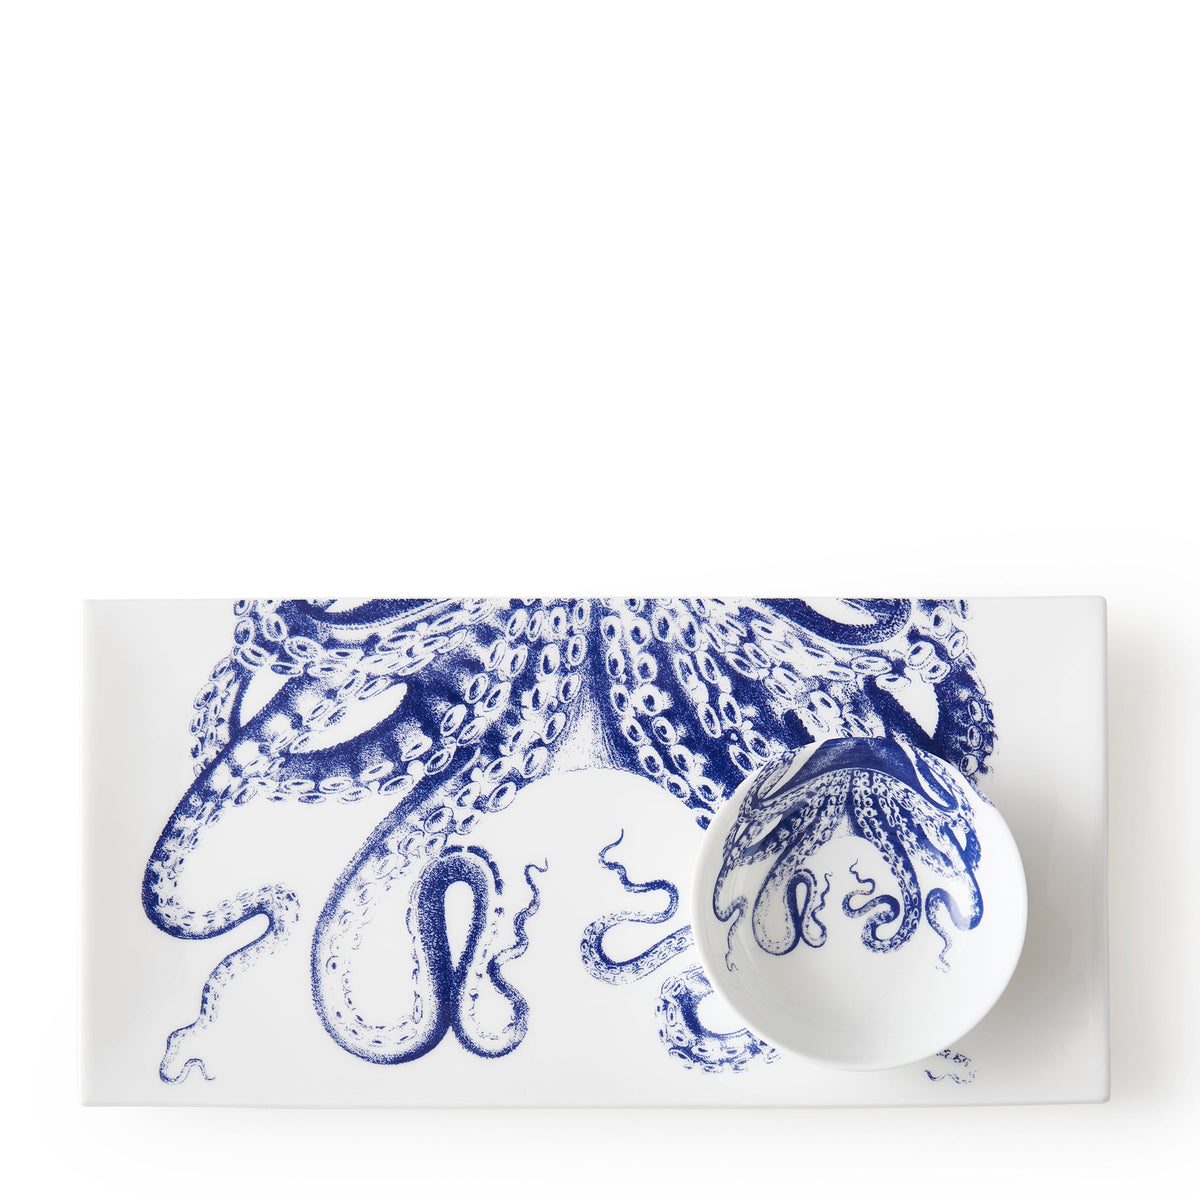 A Lucy Dipping Dish Set/4 by Caskata with a blue and white octopus design on it.